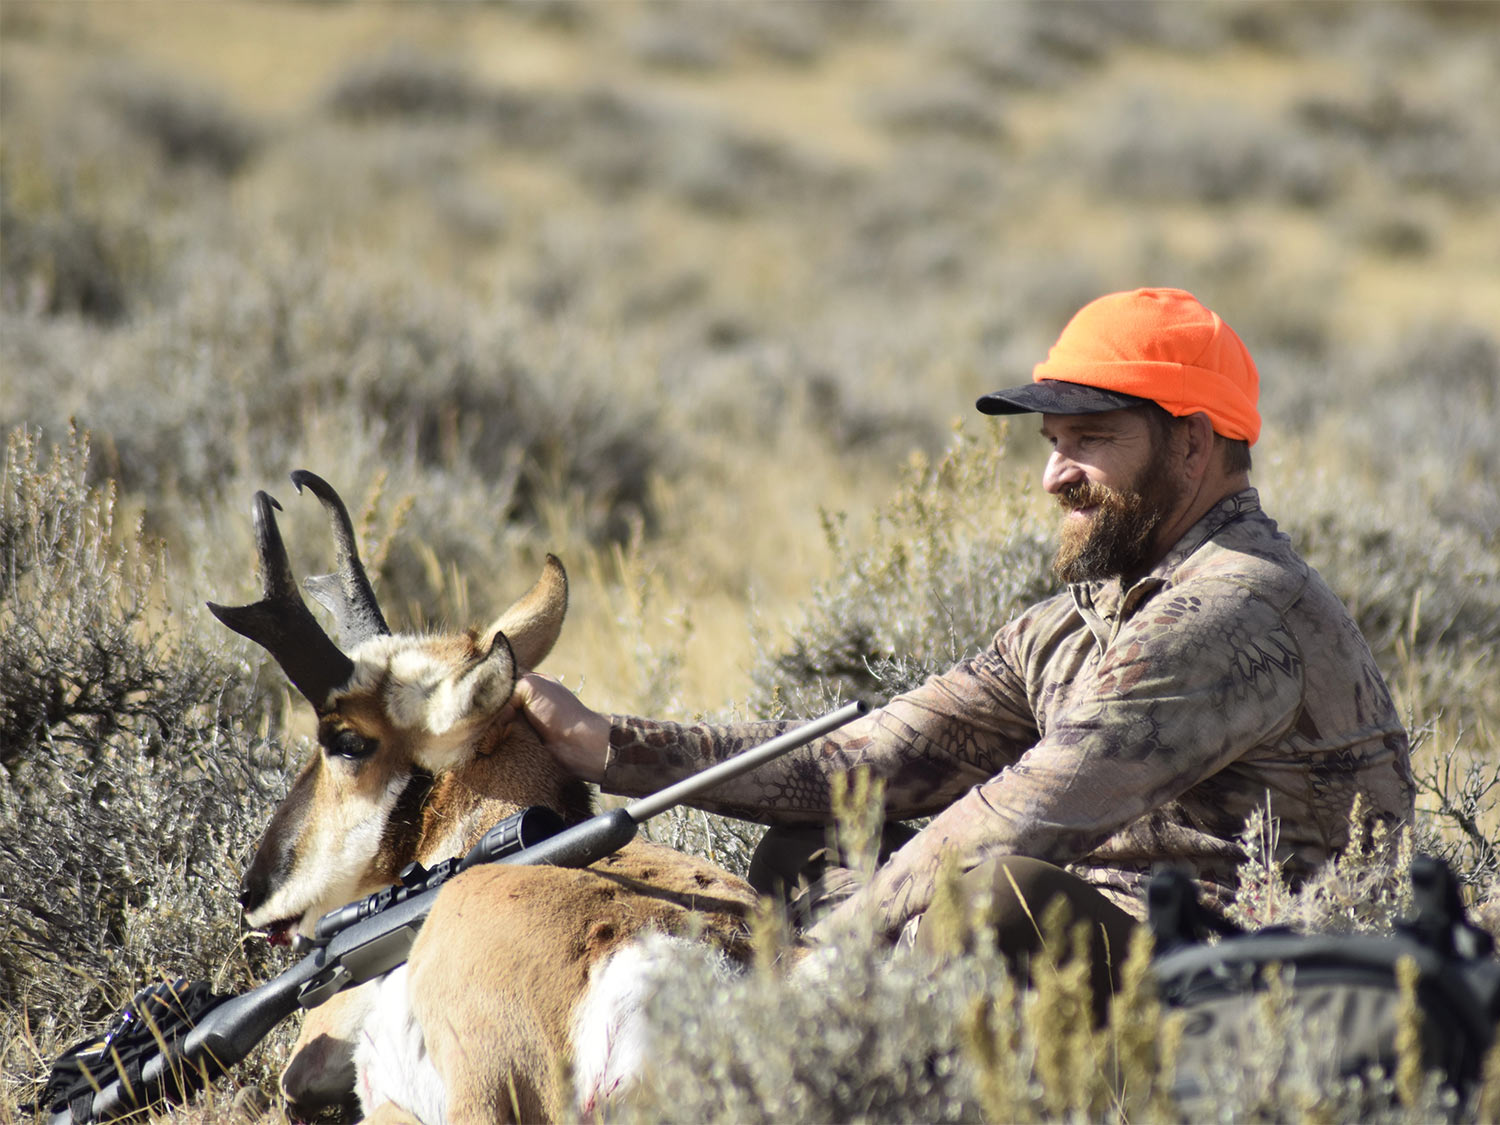 A hunter in orange sits and poses behind a dropped